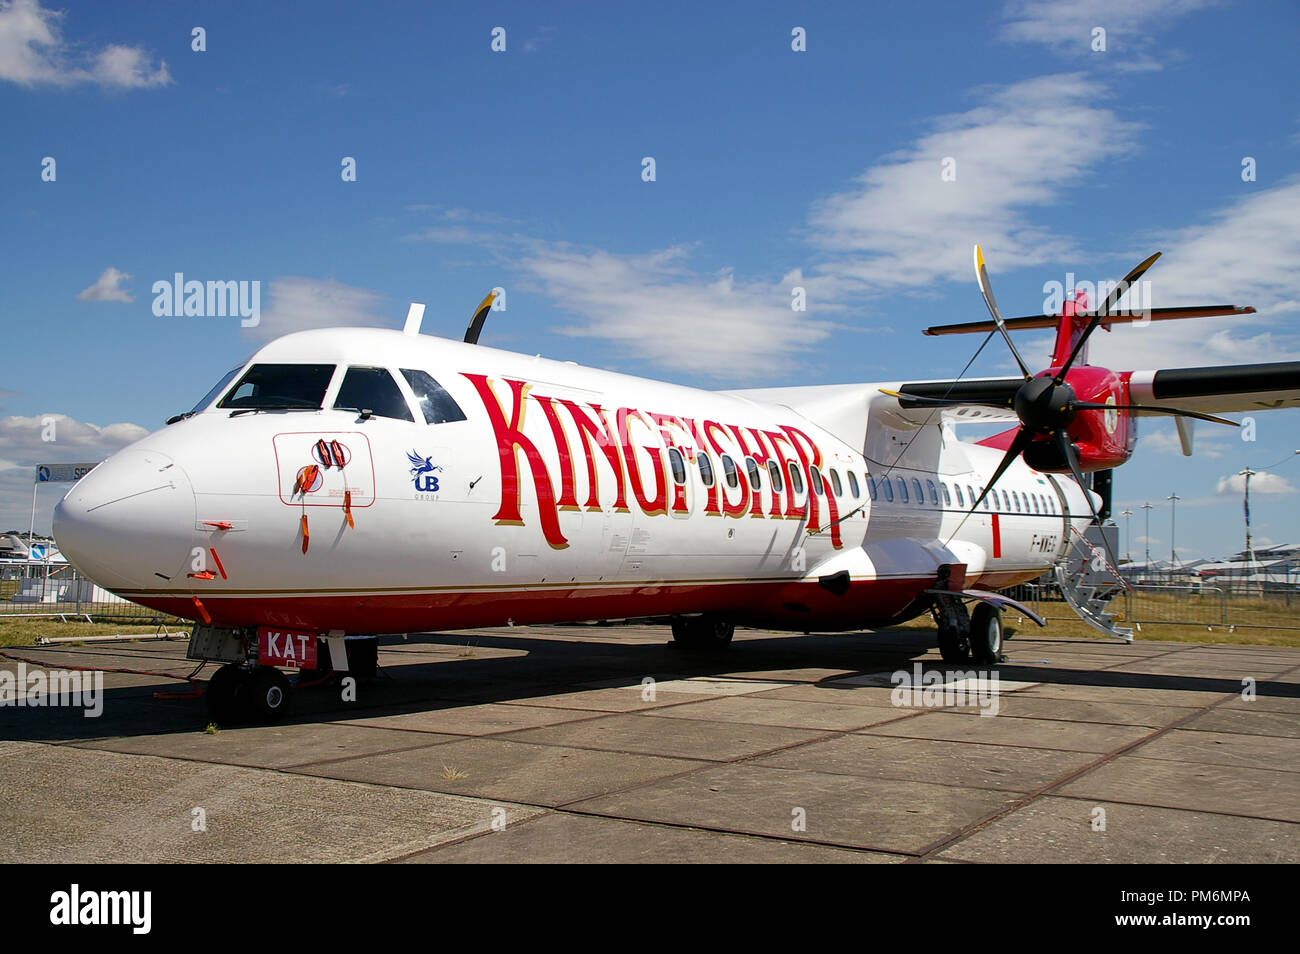 Kingfisher Airlines ATR72 ATR 72 plane at Farnborough International Airshow. F-WWEG airliner. Indian airline Stock Photo